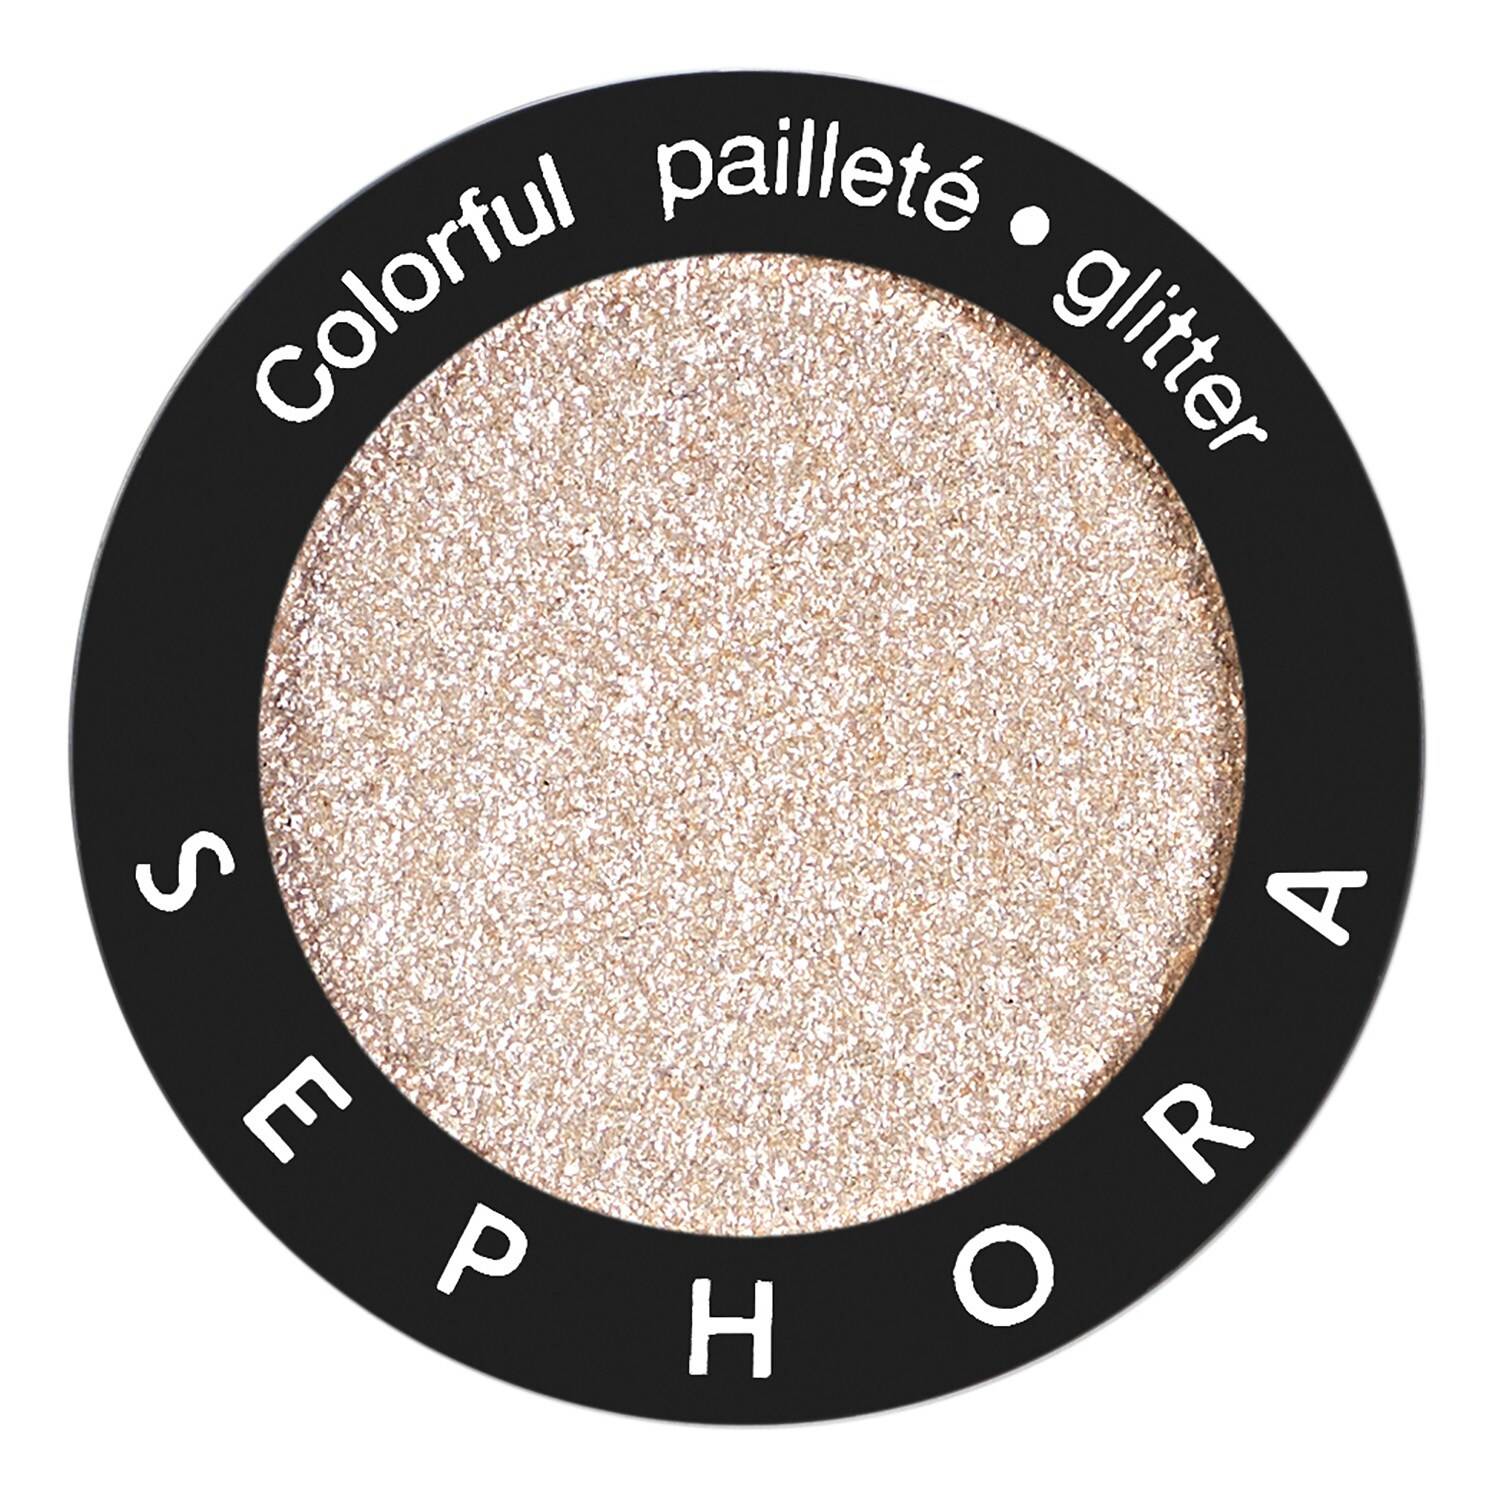 Sephora Collection Colorful Eyeshadow Shimmer Finish 1.20G 205 Ballet Shoes - Glitter